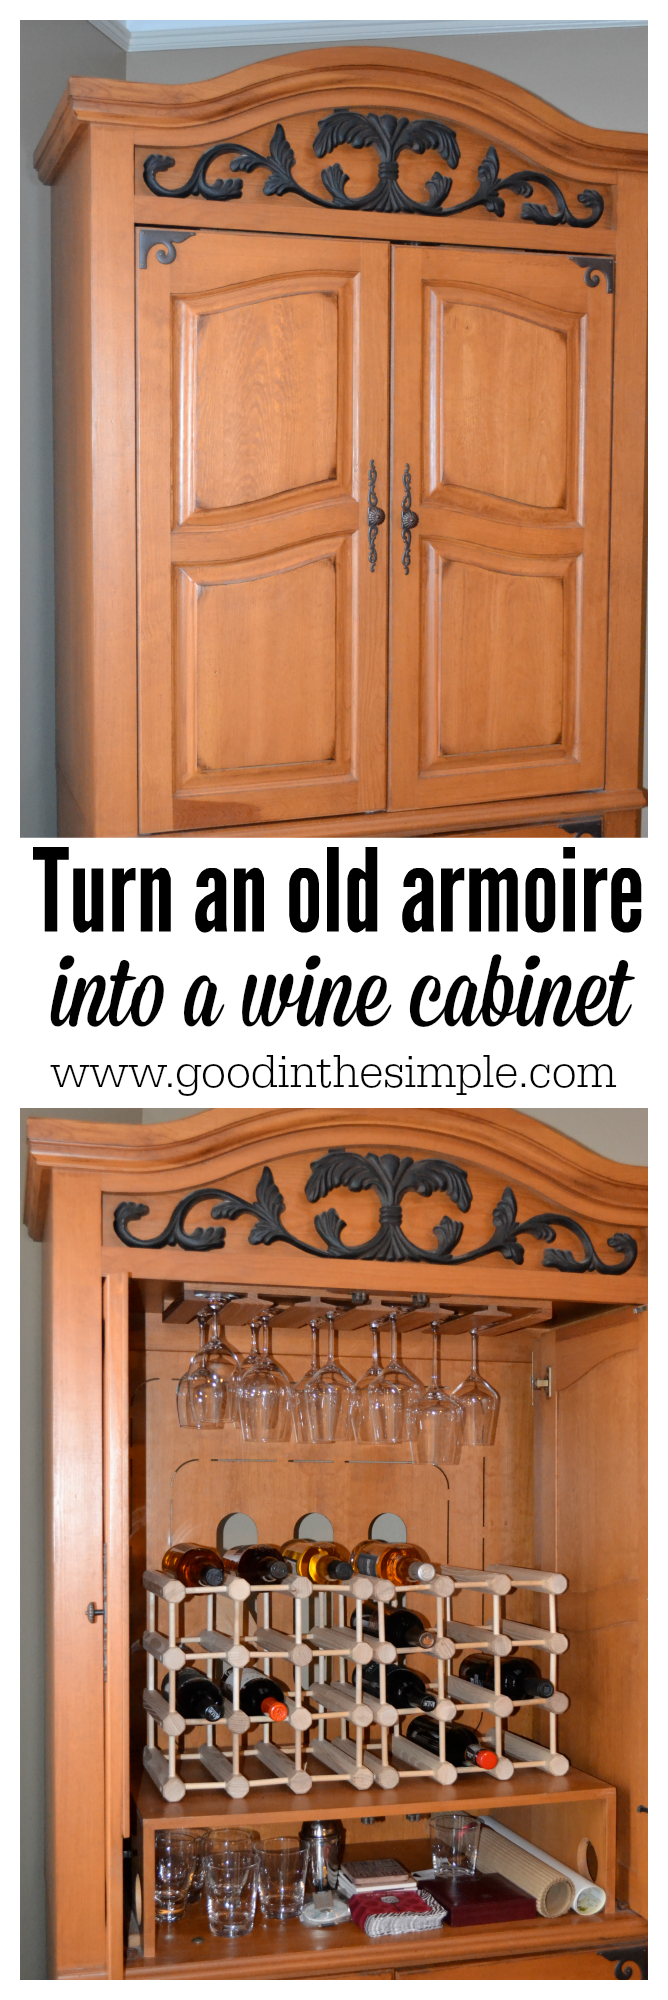 Simple DIY project: turn an old television armoire into a wine/liquor cabinet in a few easy steps.